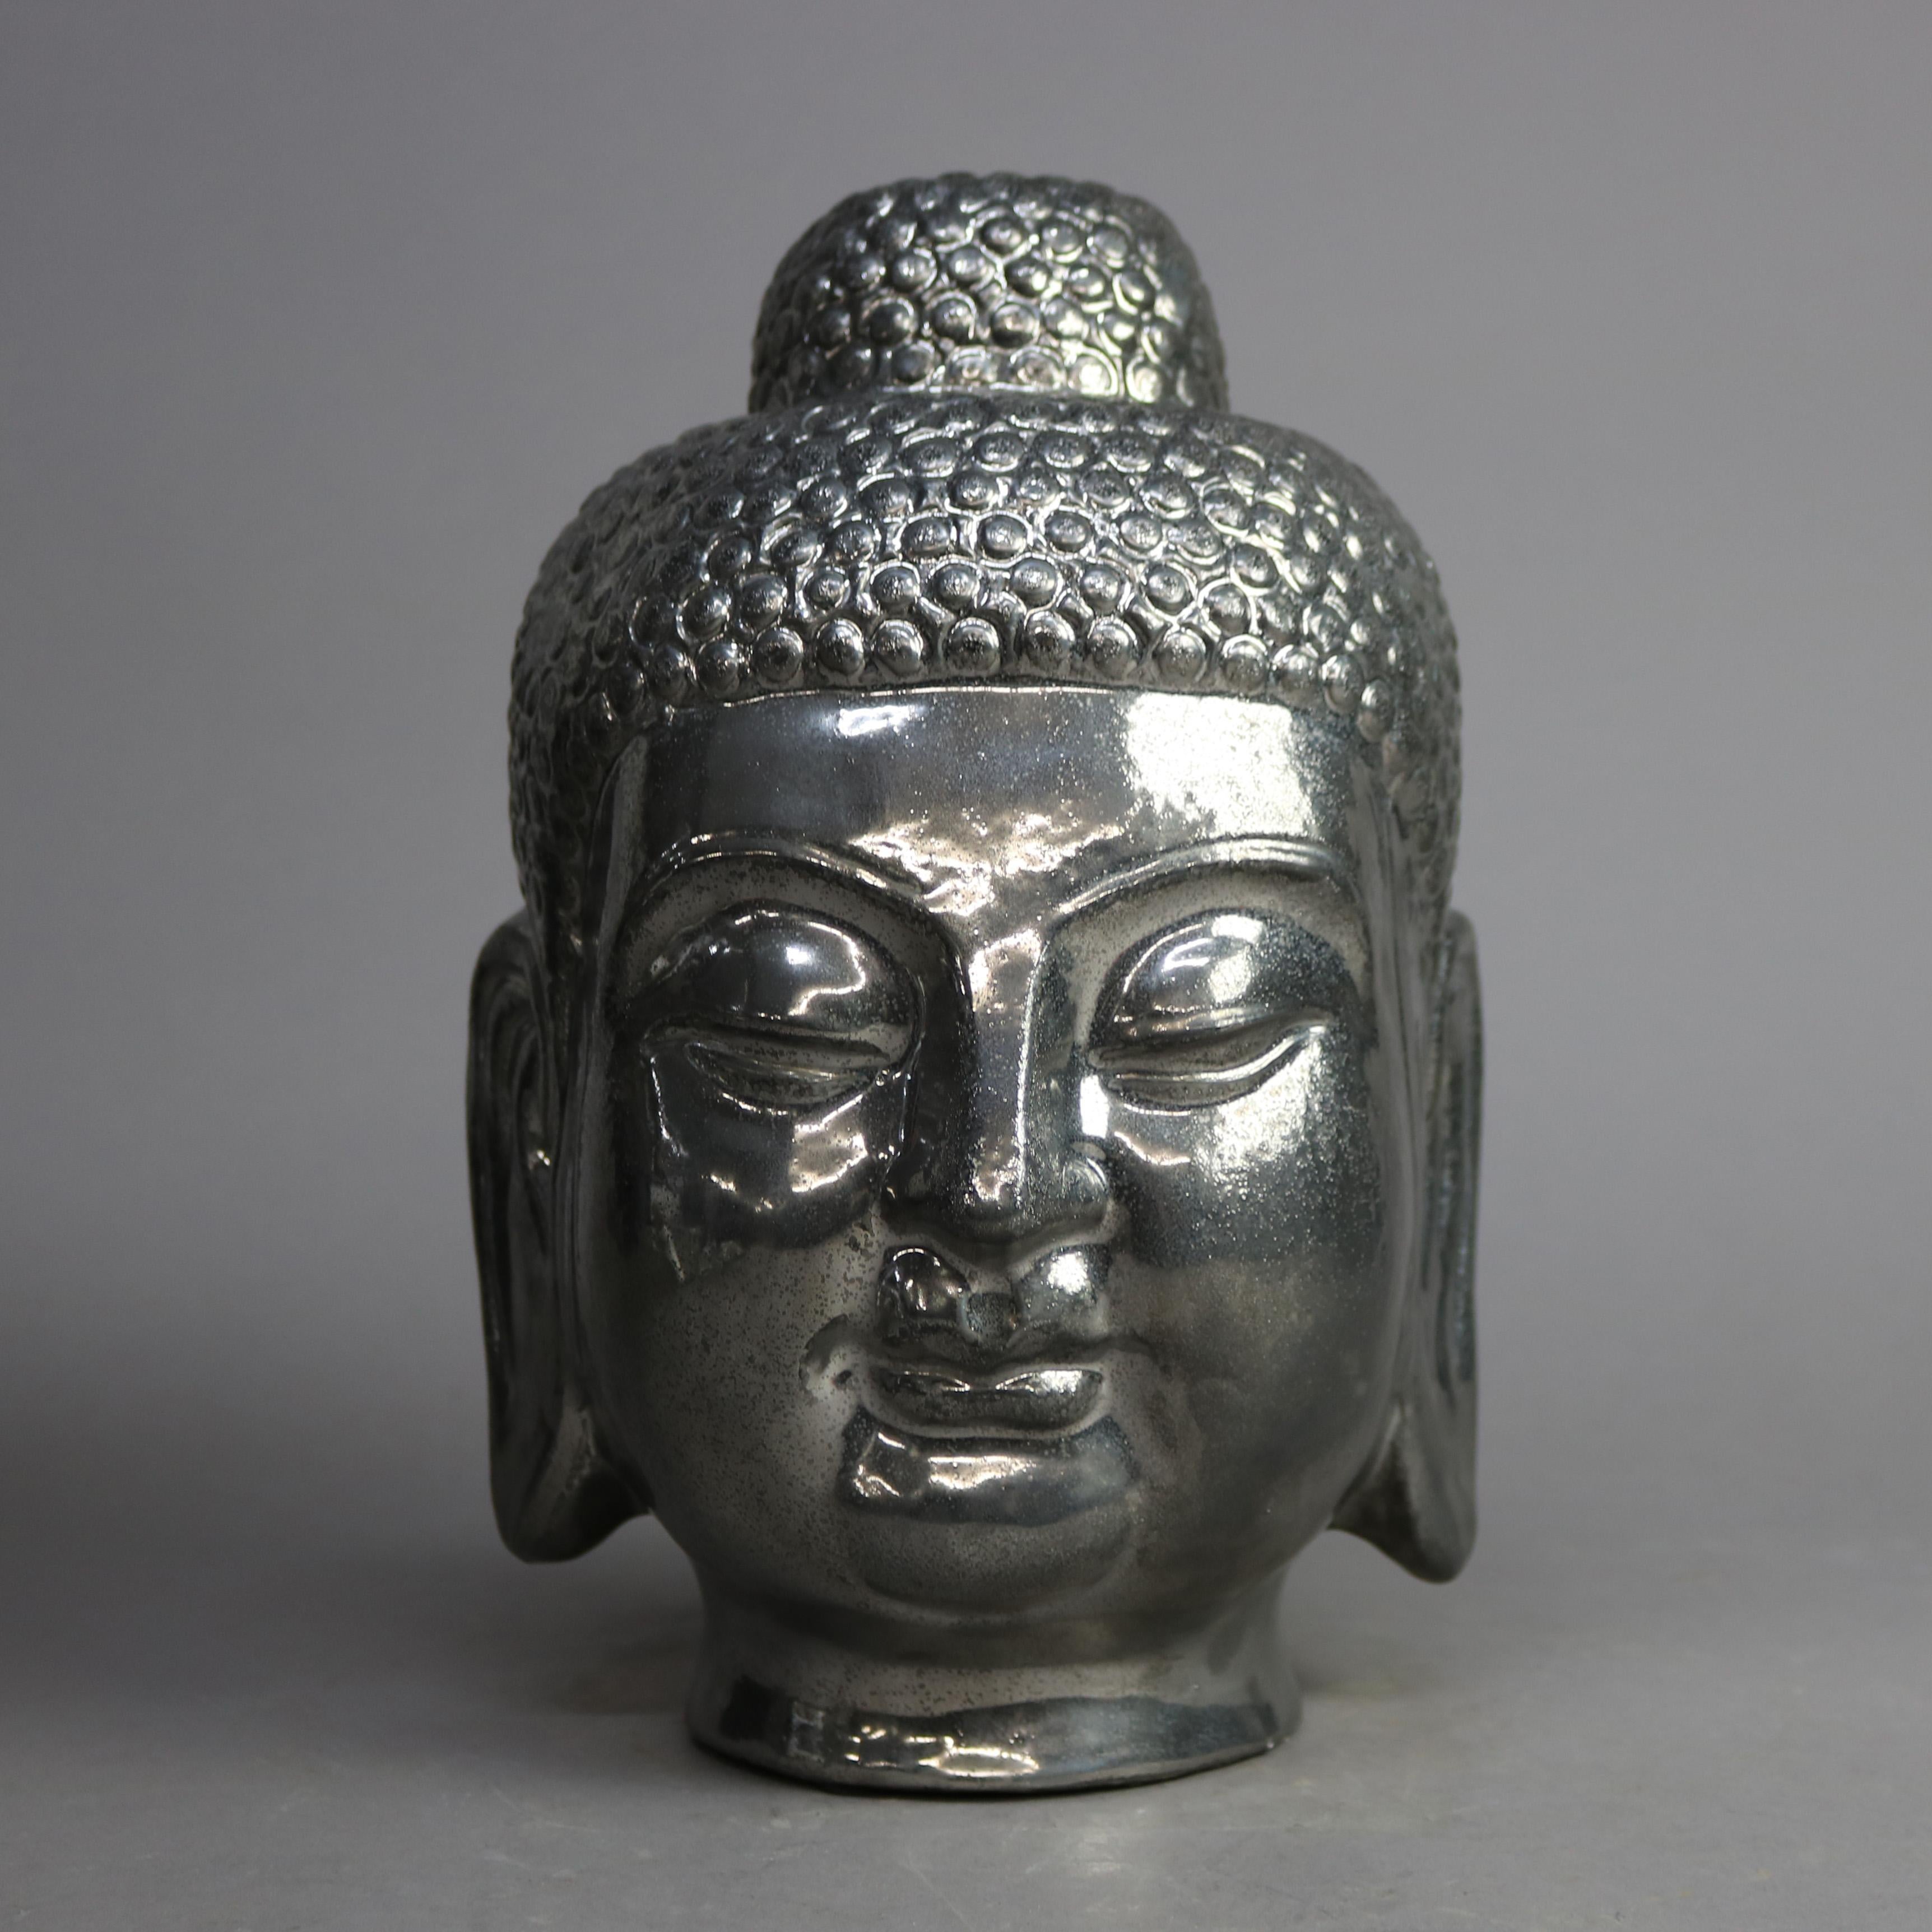 A Tibetan bust offers silver gilt ceramic bust of Buddha, 20th century

Measures - 13''H x 8''W x 8.5''D.

Catalogue Note: Ask about DISCOUNTED DELIVERY RATES available to most regions within 1,500 miles of New York.